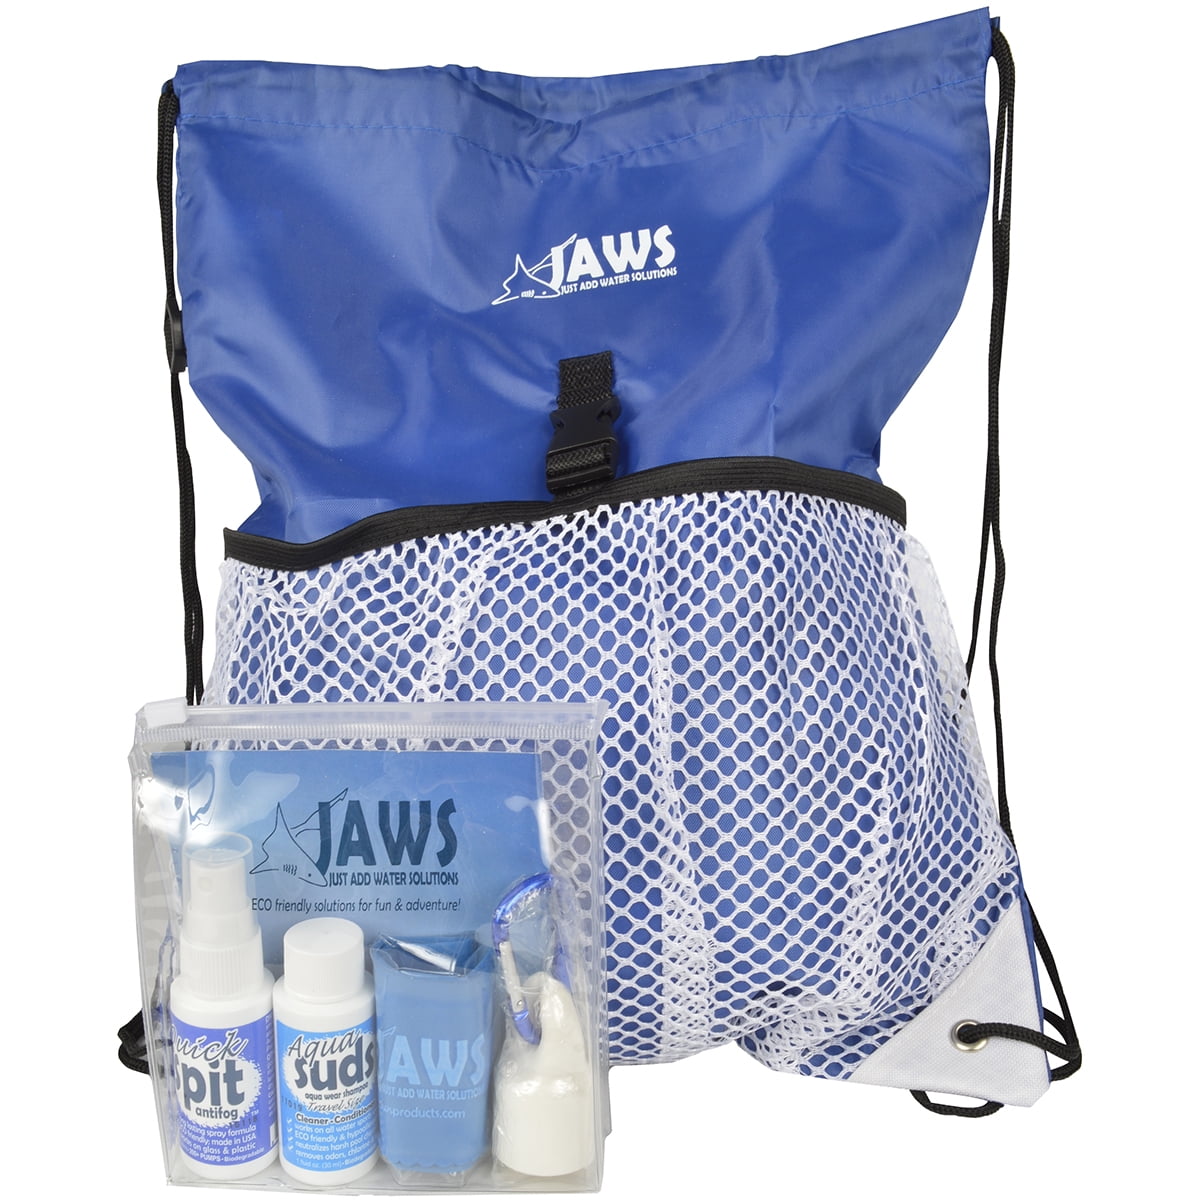 JAWS QuickPACK Drawstring Organizing Backpack with SwimPack Aquatic Care Kit 